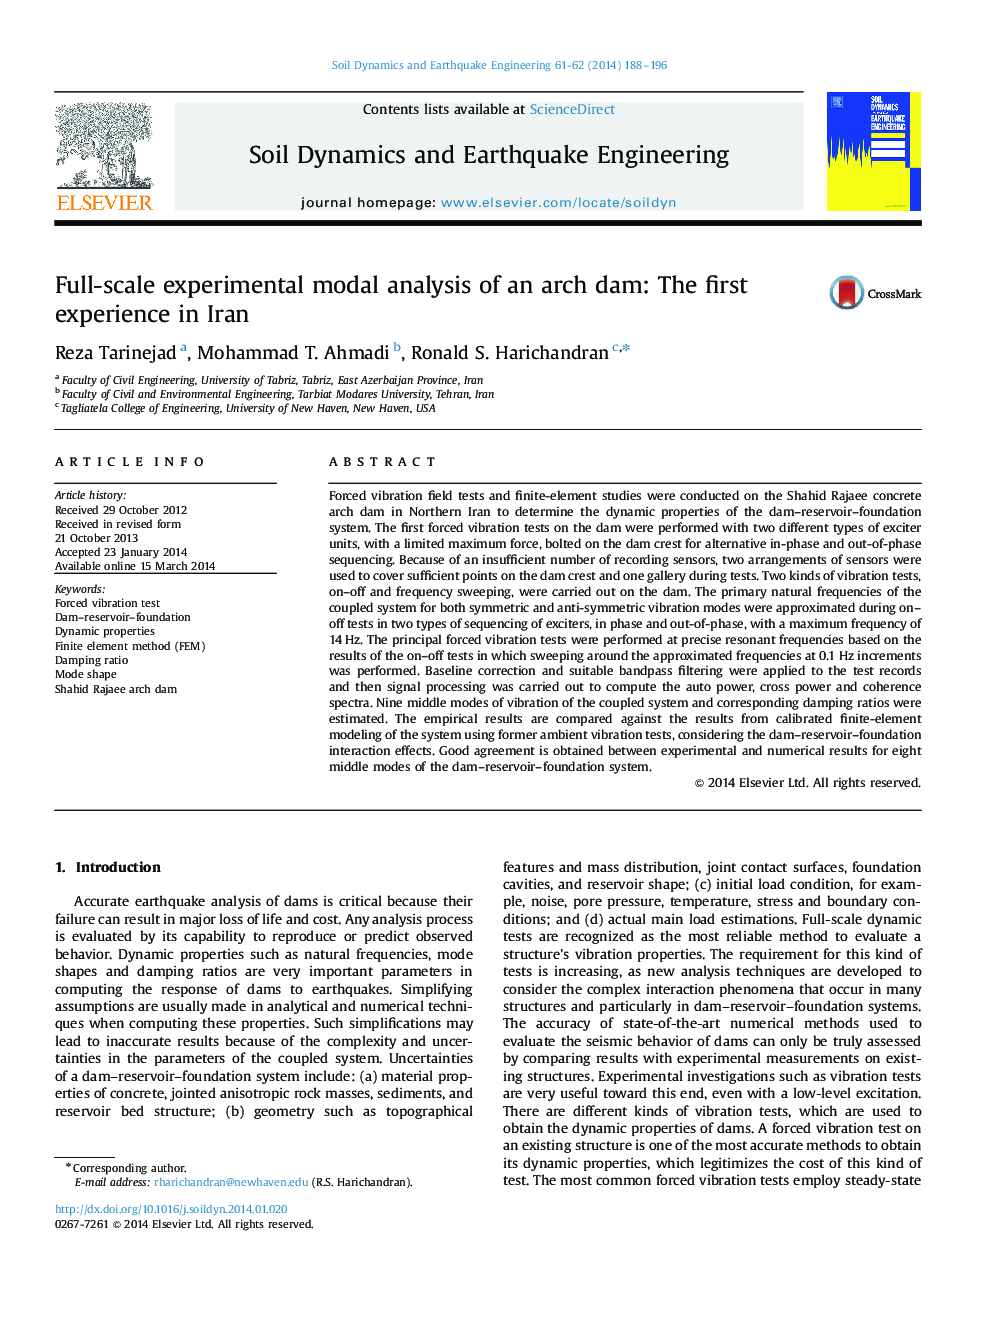 Full-scale experimental modal analysis of an arch dam: The first experience in Iran